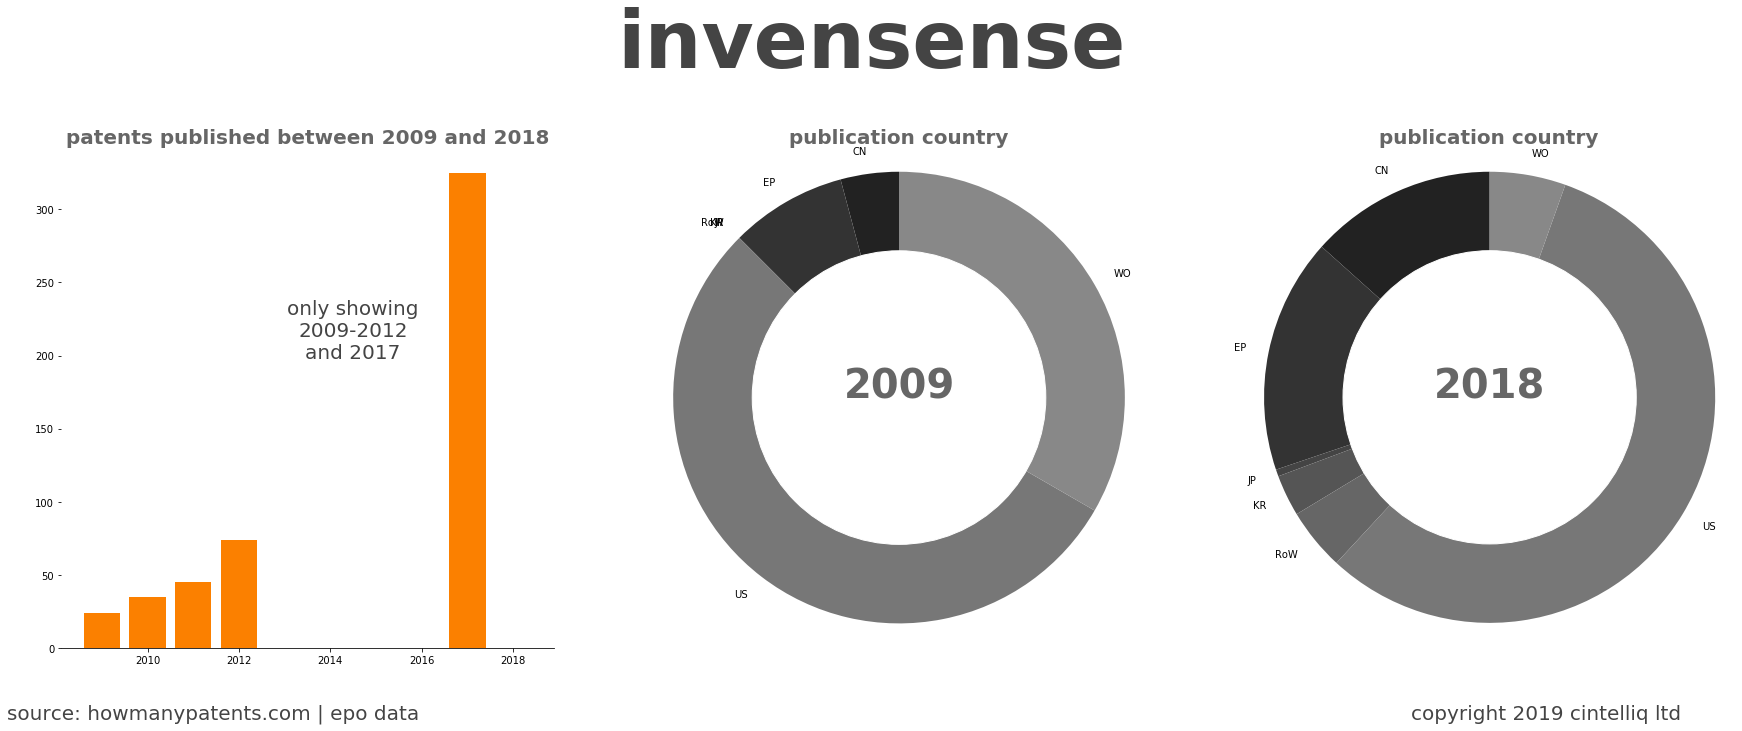 summary of patents for Invensense